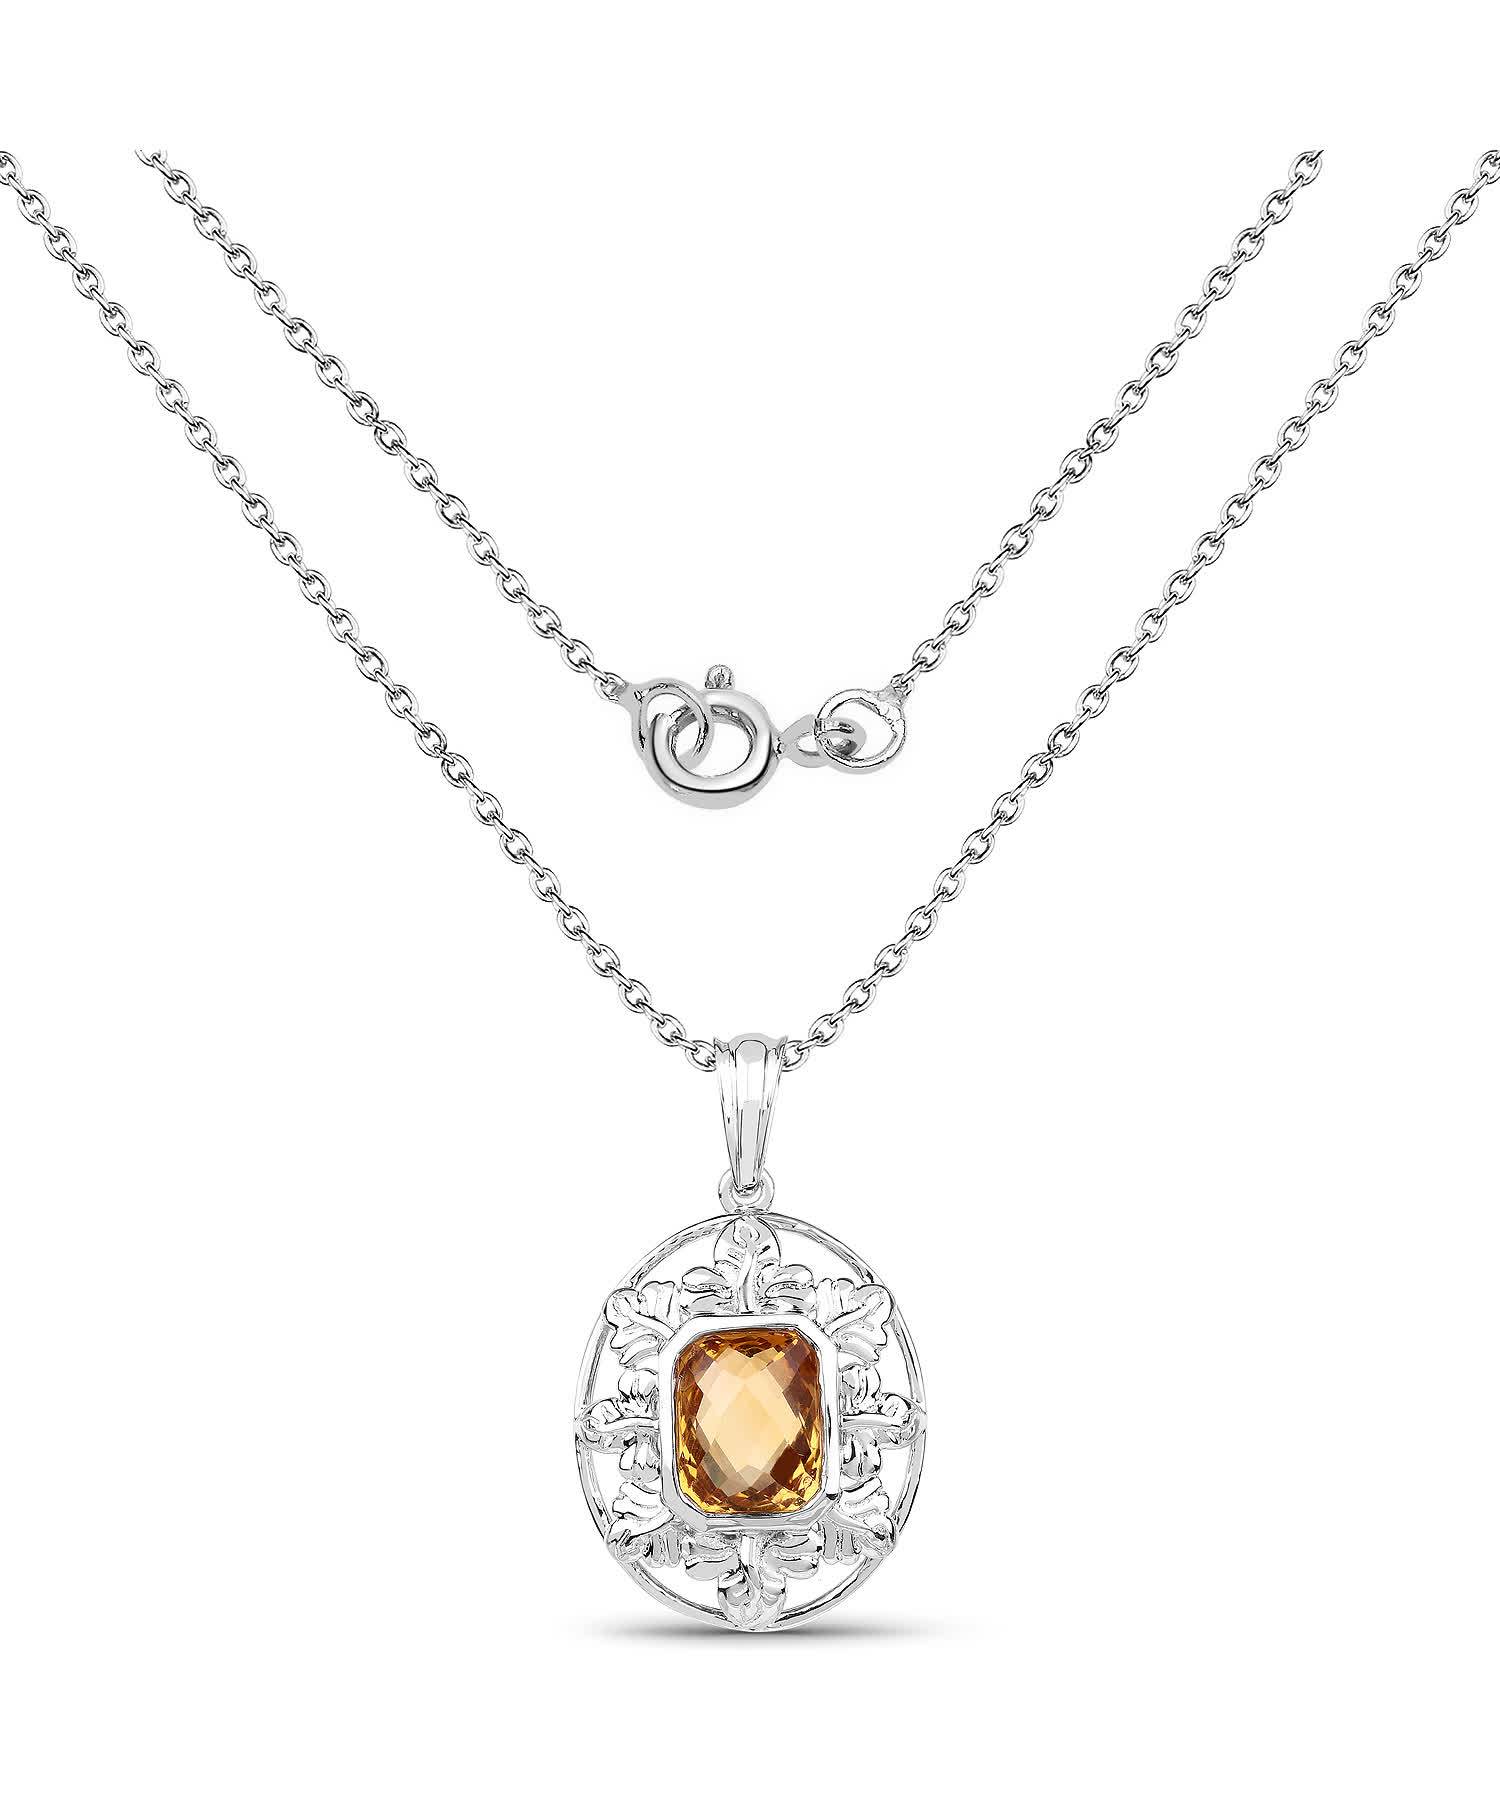 3.50ctw Natural Citrine Rhodium Plated 925 Sterling Silver Leaf Pendant With Chain View 2